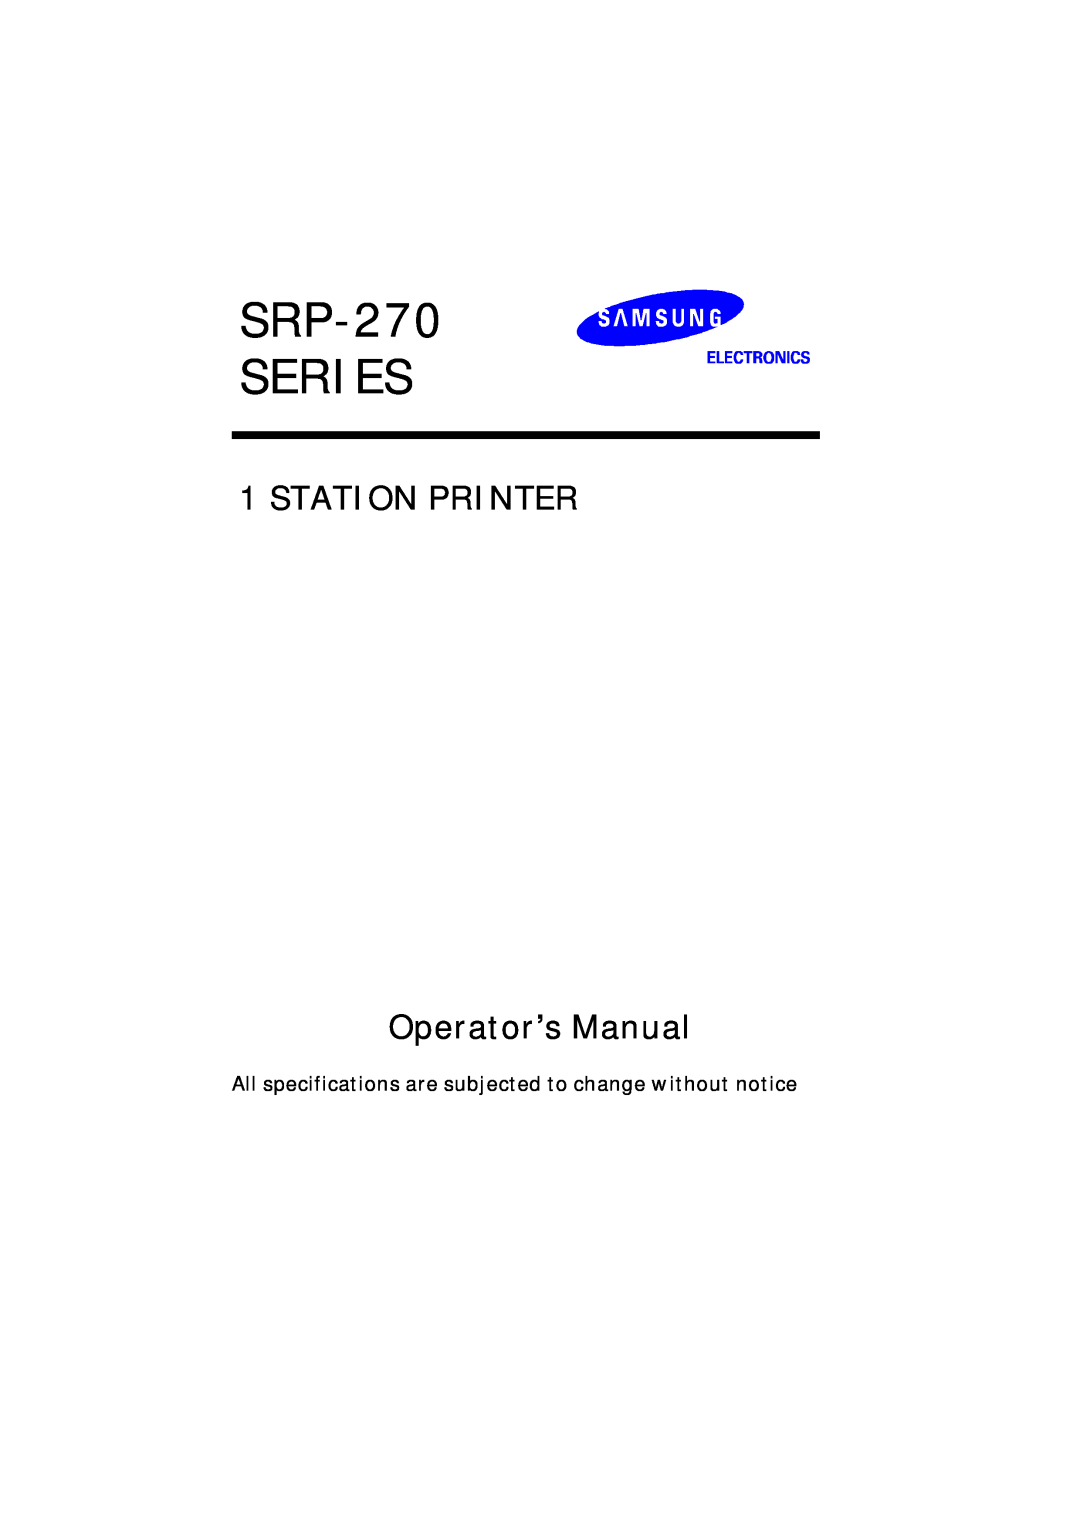 Samsung SRP-270S, SRP-270P, SRP-270U specifications SRP-270 SERIES, STATION PRINTER Operator’s Manual 